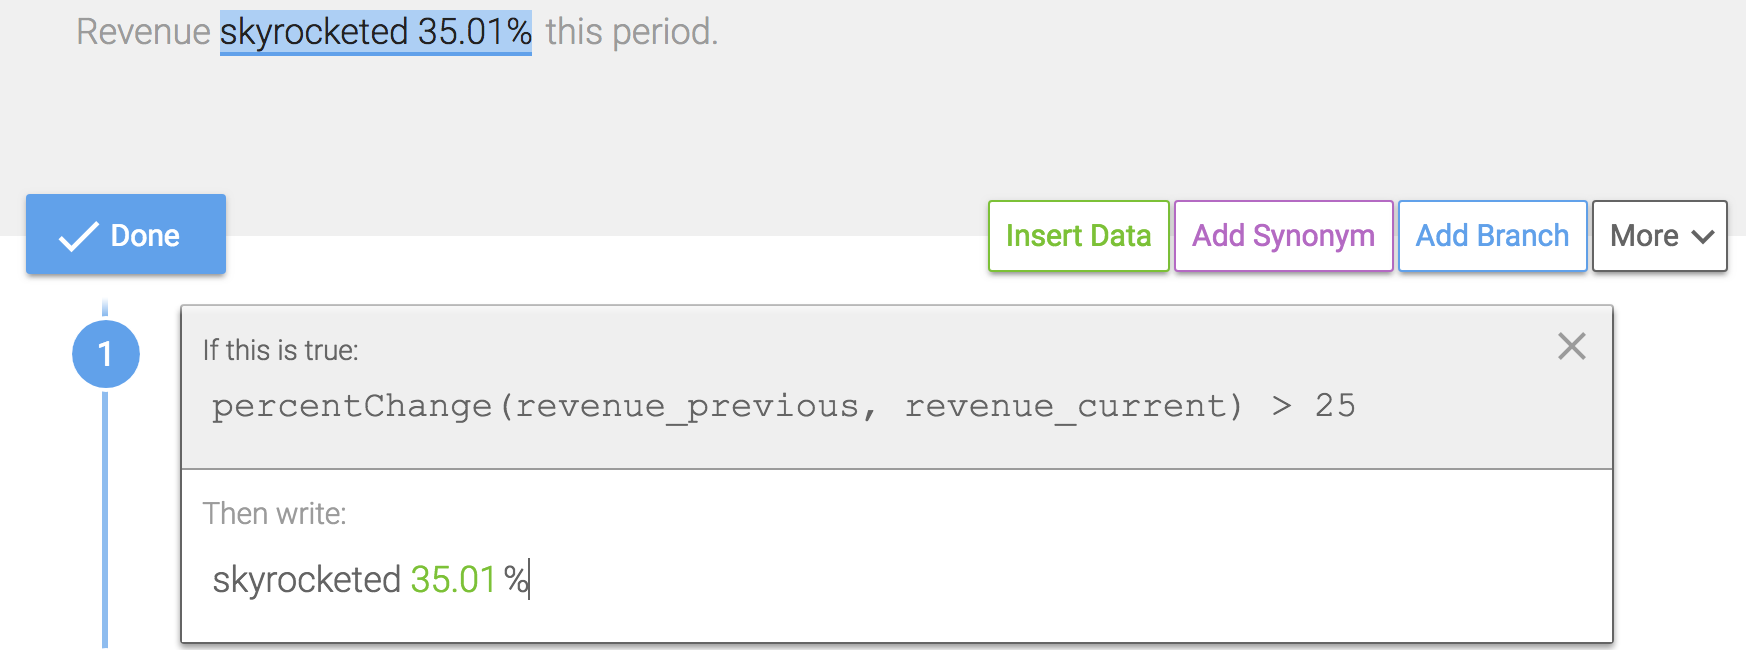 In this example, we want to know the percent change between the original value (revenue_previous) and the changed value (revenue_current). If it's greater than 25%, this phrase will be written.